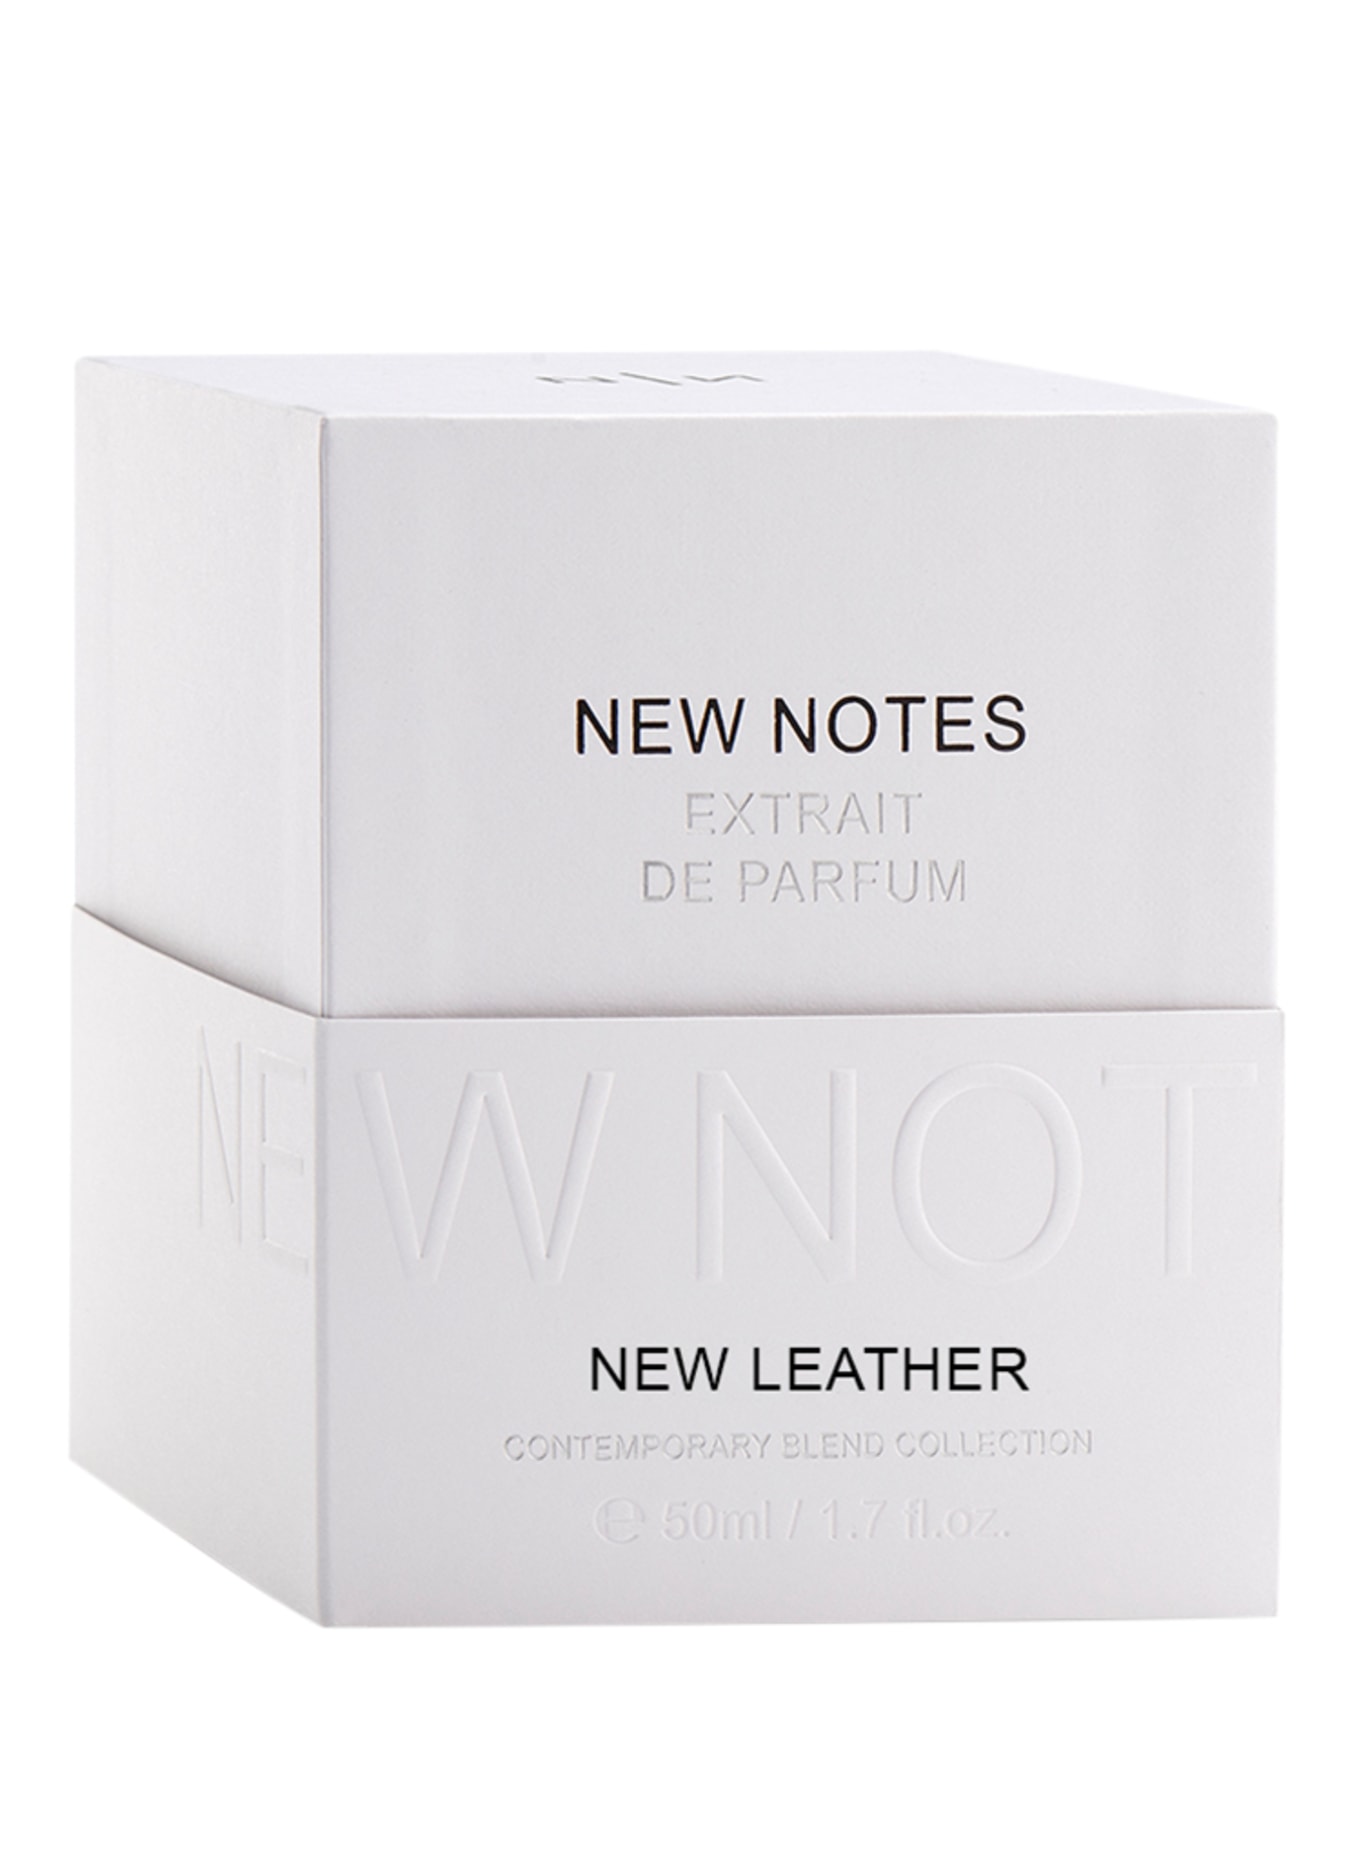 NEW NOTES NEW LEATHER (Bild 2)